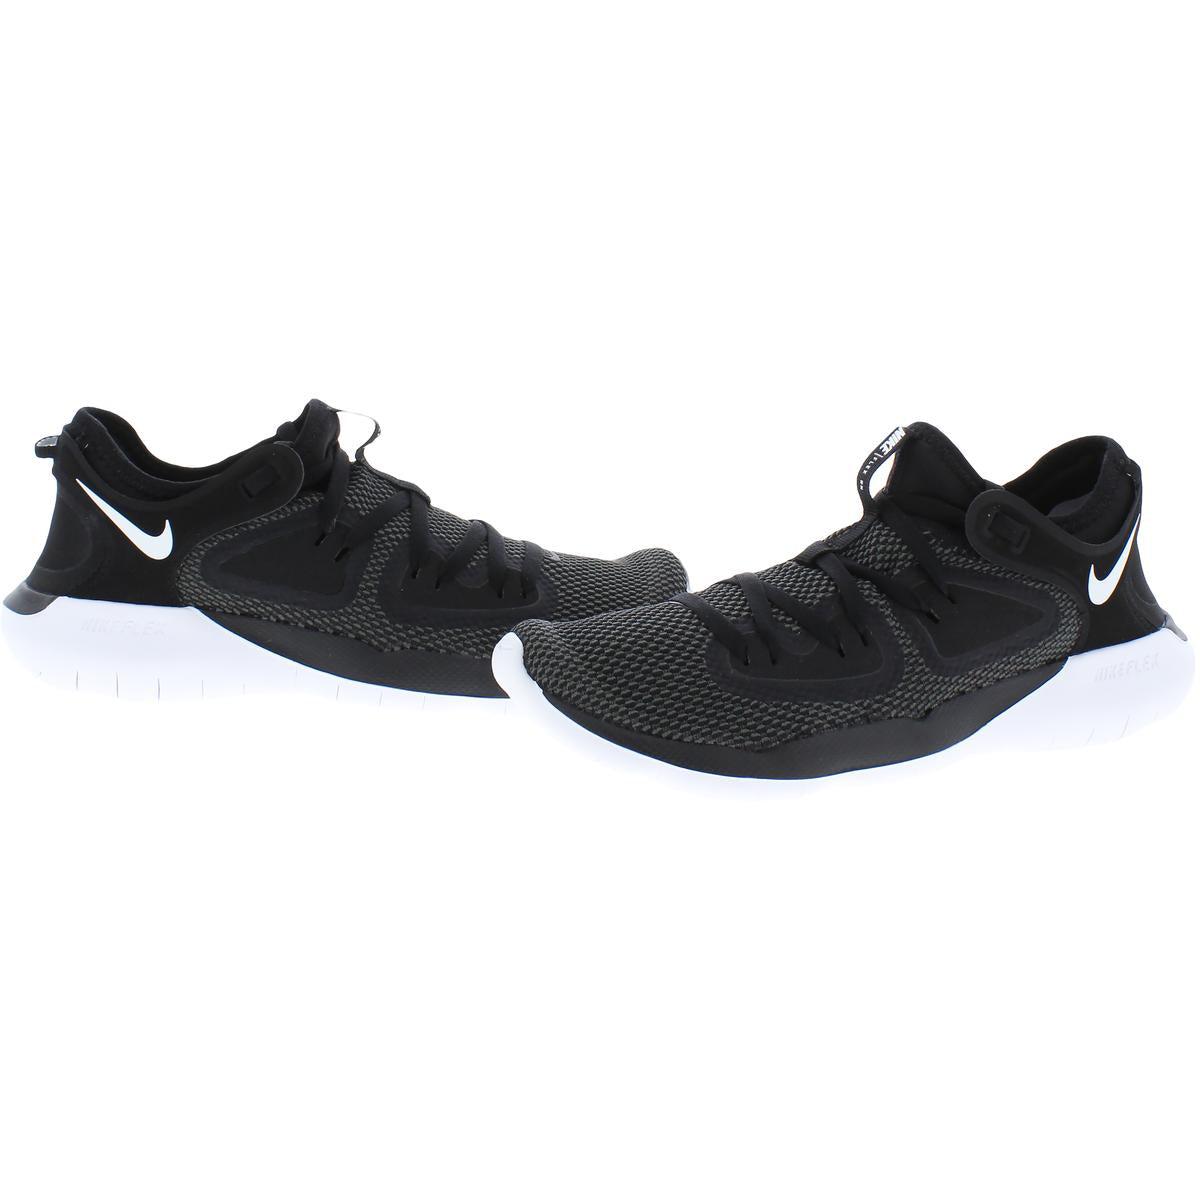 Nike 2019 Rn Lifestyle Active Running Shoes Black | Lyst